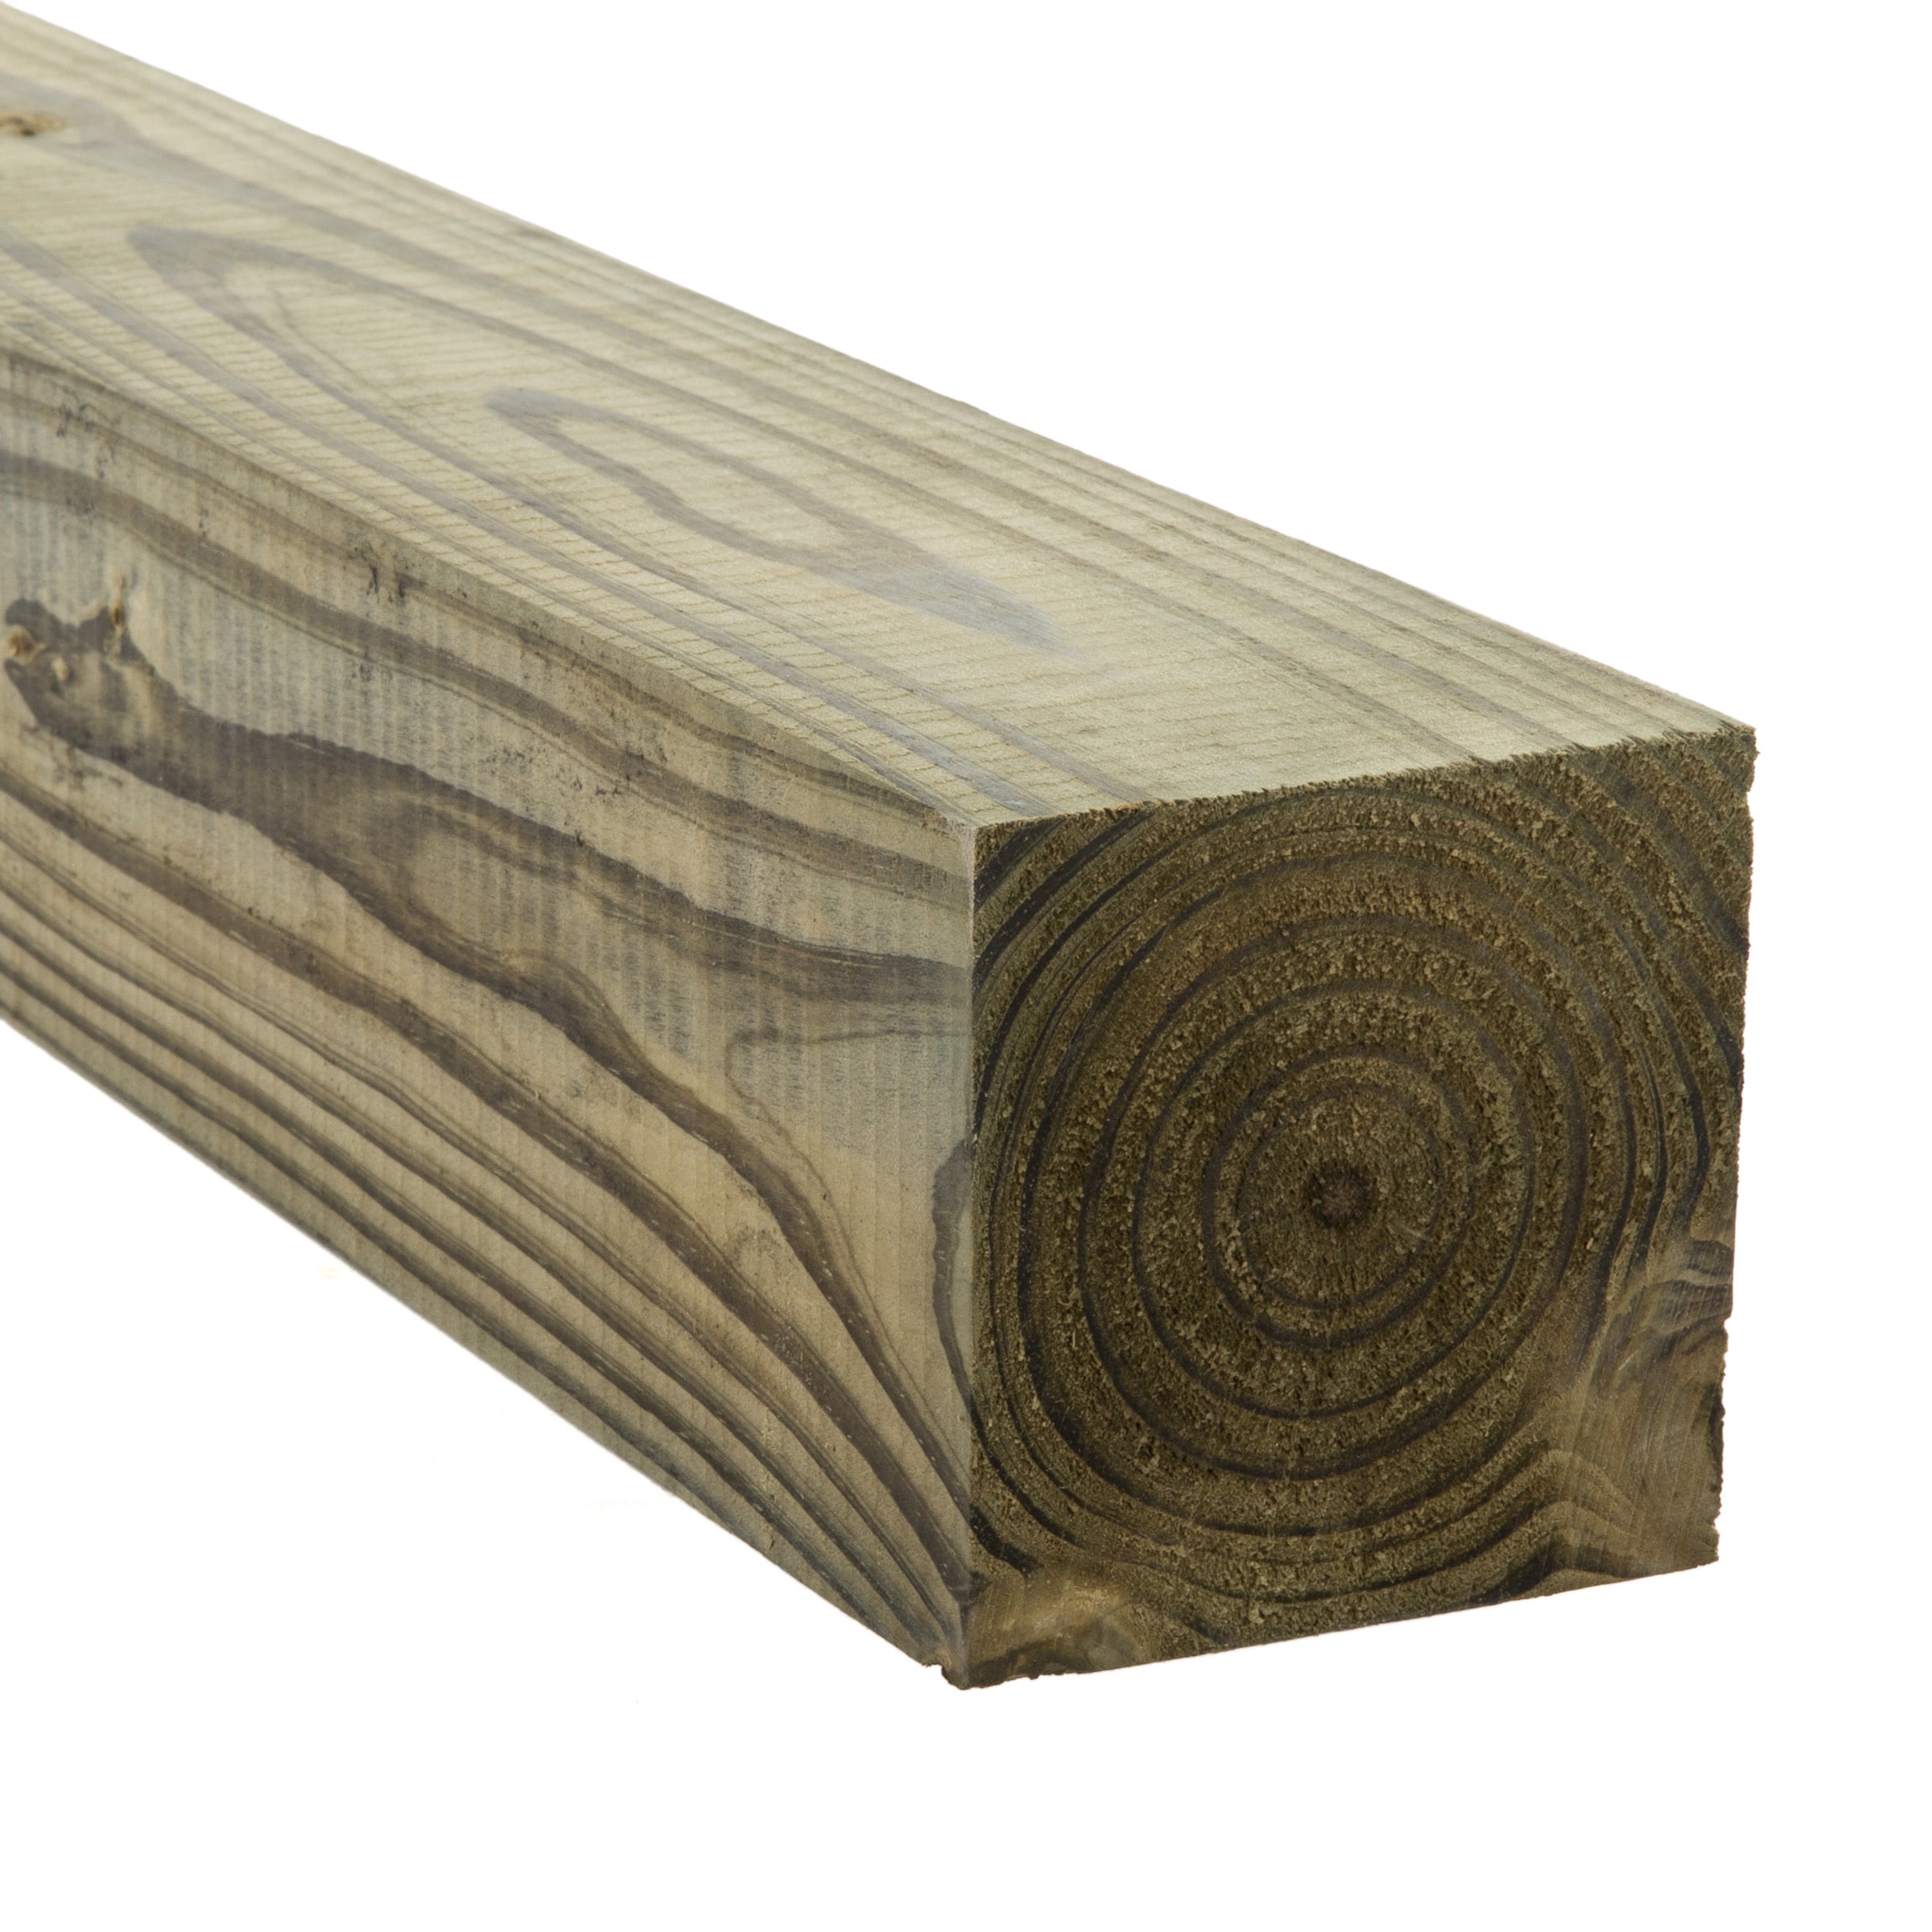 Southern yellow pine 7-ft Lumber & Composites at Lowes.com